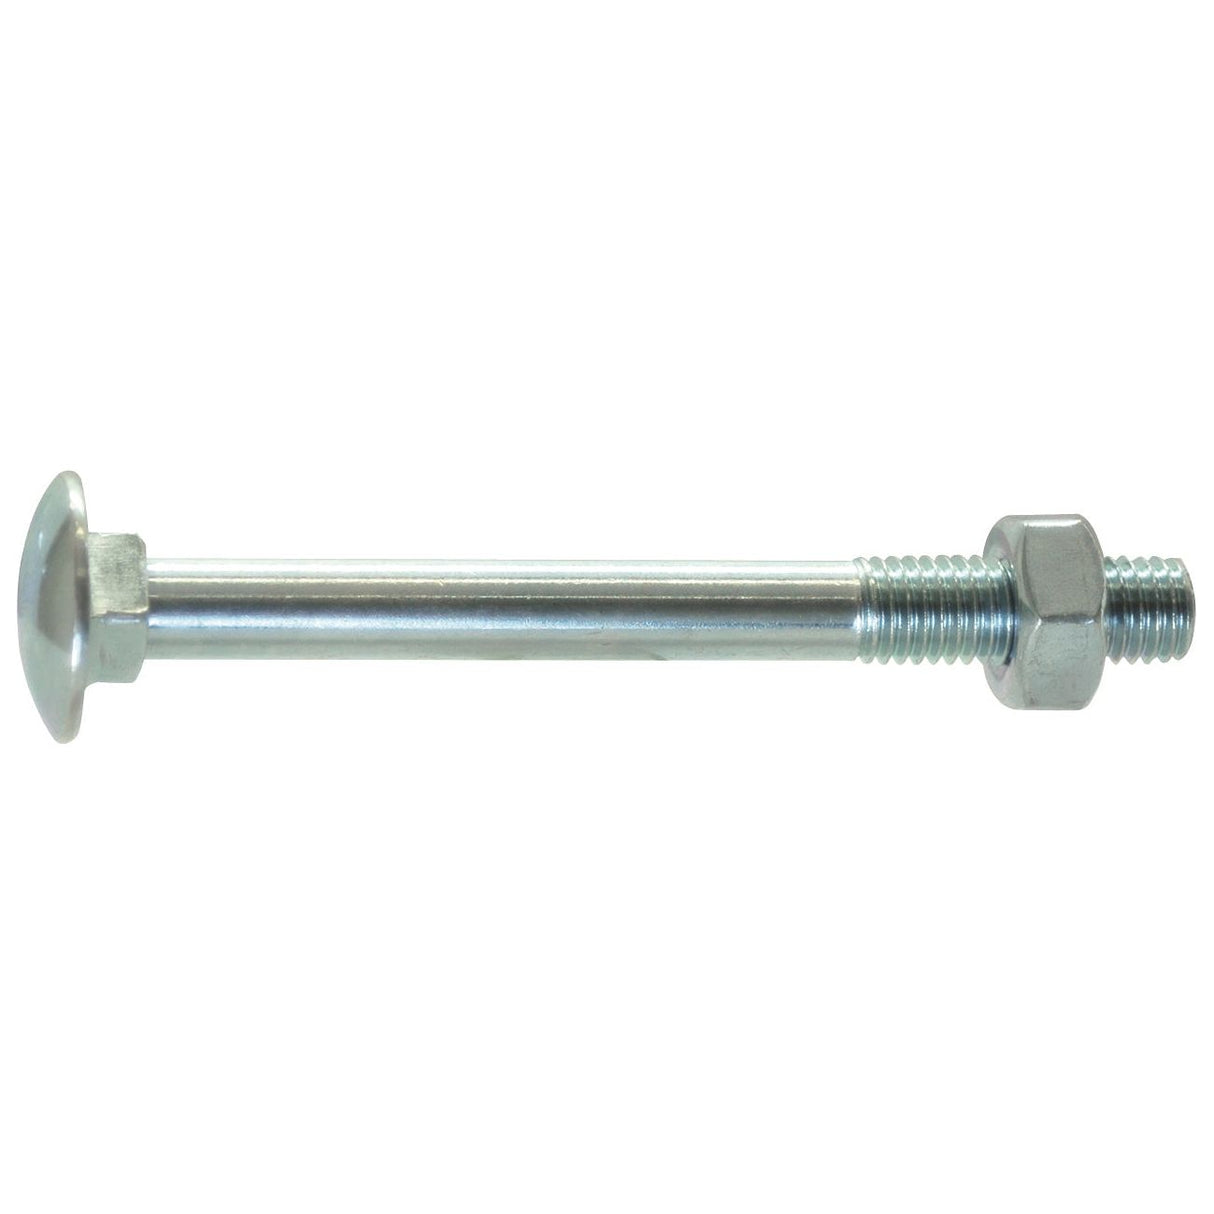 Metric Carriage Bolt and Nut, Size: M6 x 30mm (Din 603/555)
 - S.8225 - Farming Parts